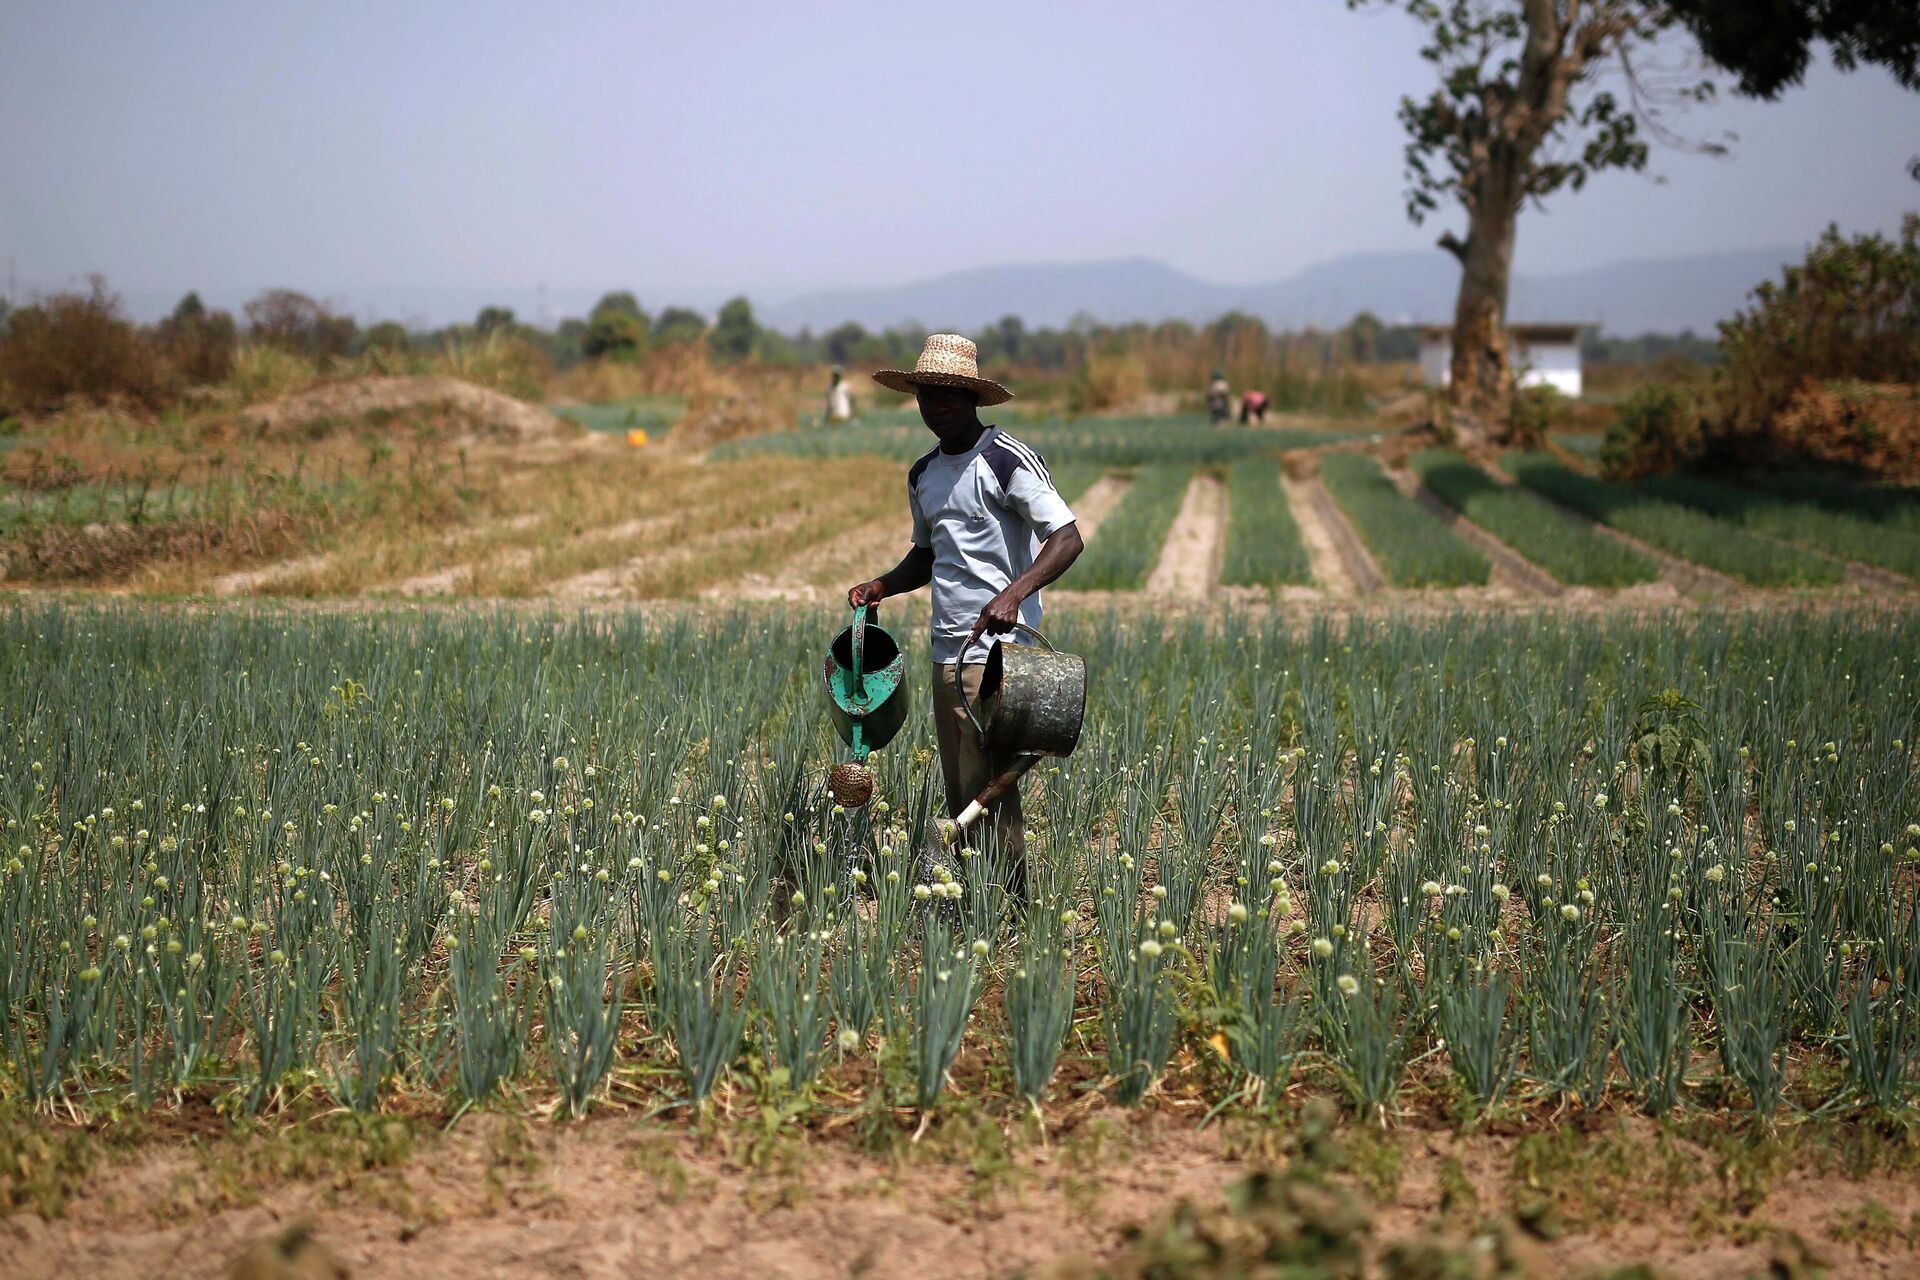 A man waters his field of onions outside  Bangui, Central African Republic,  Thursday Feb. 11, 2016. The U.N. World Food Program estimates that nearly half the country _ 2.5 million people _ are facing hunger as  more than two years of violence has severely disrupted the country’s agriculture and health care sectors.Two former prime ministers,  Touadera and  Anicet Georges Dologuele, are running neck-and-neck in the second round of presidential elections Sunday Feb. 14  to end years of violence pitting Muslims against Christians in the Central African Republic. (AP Photo/Jerome Delay) - Sputnik International, 1920, 10.09.2022